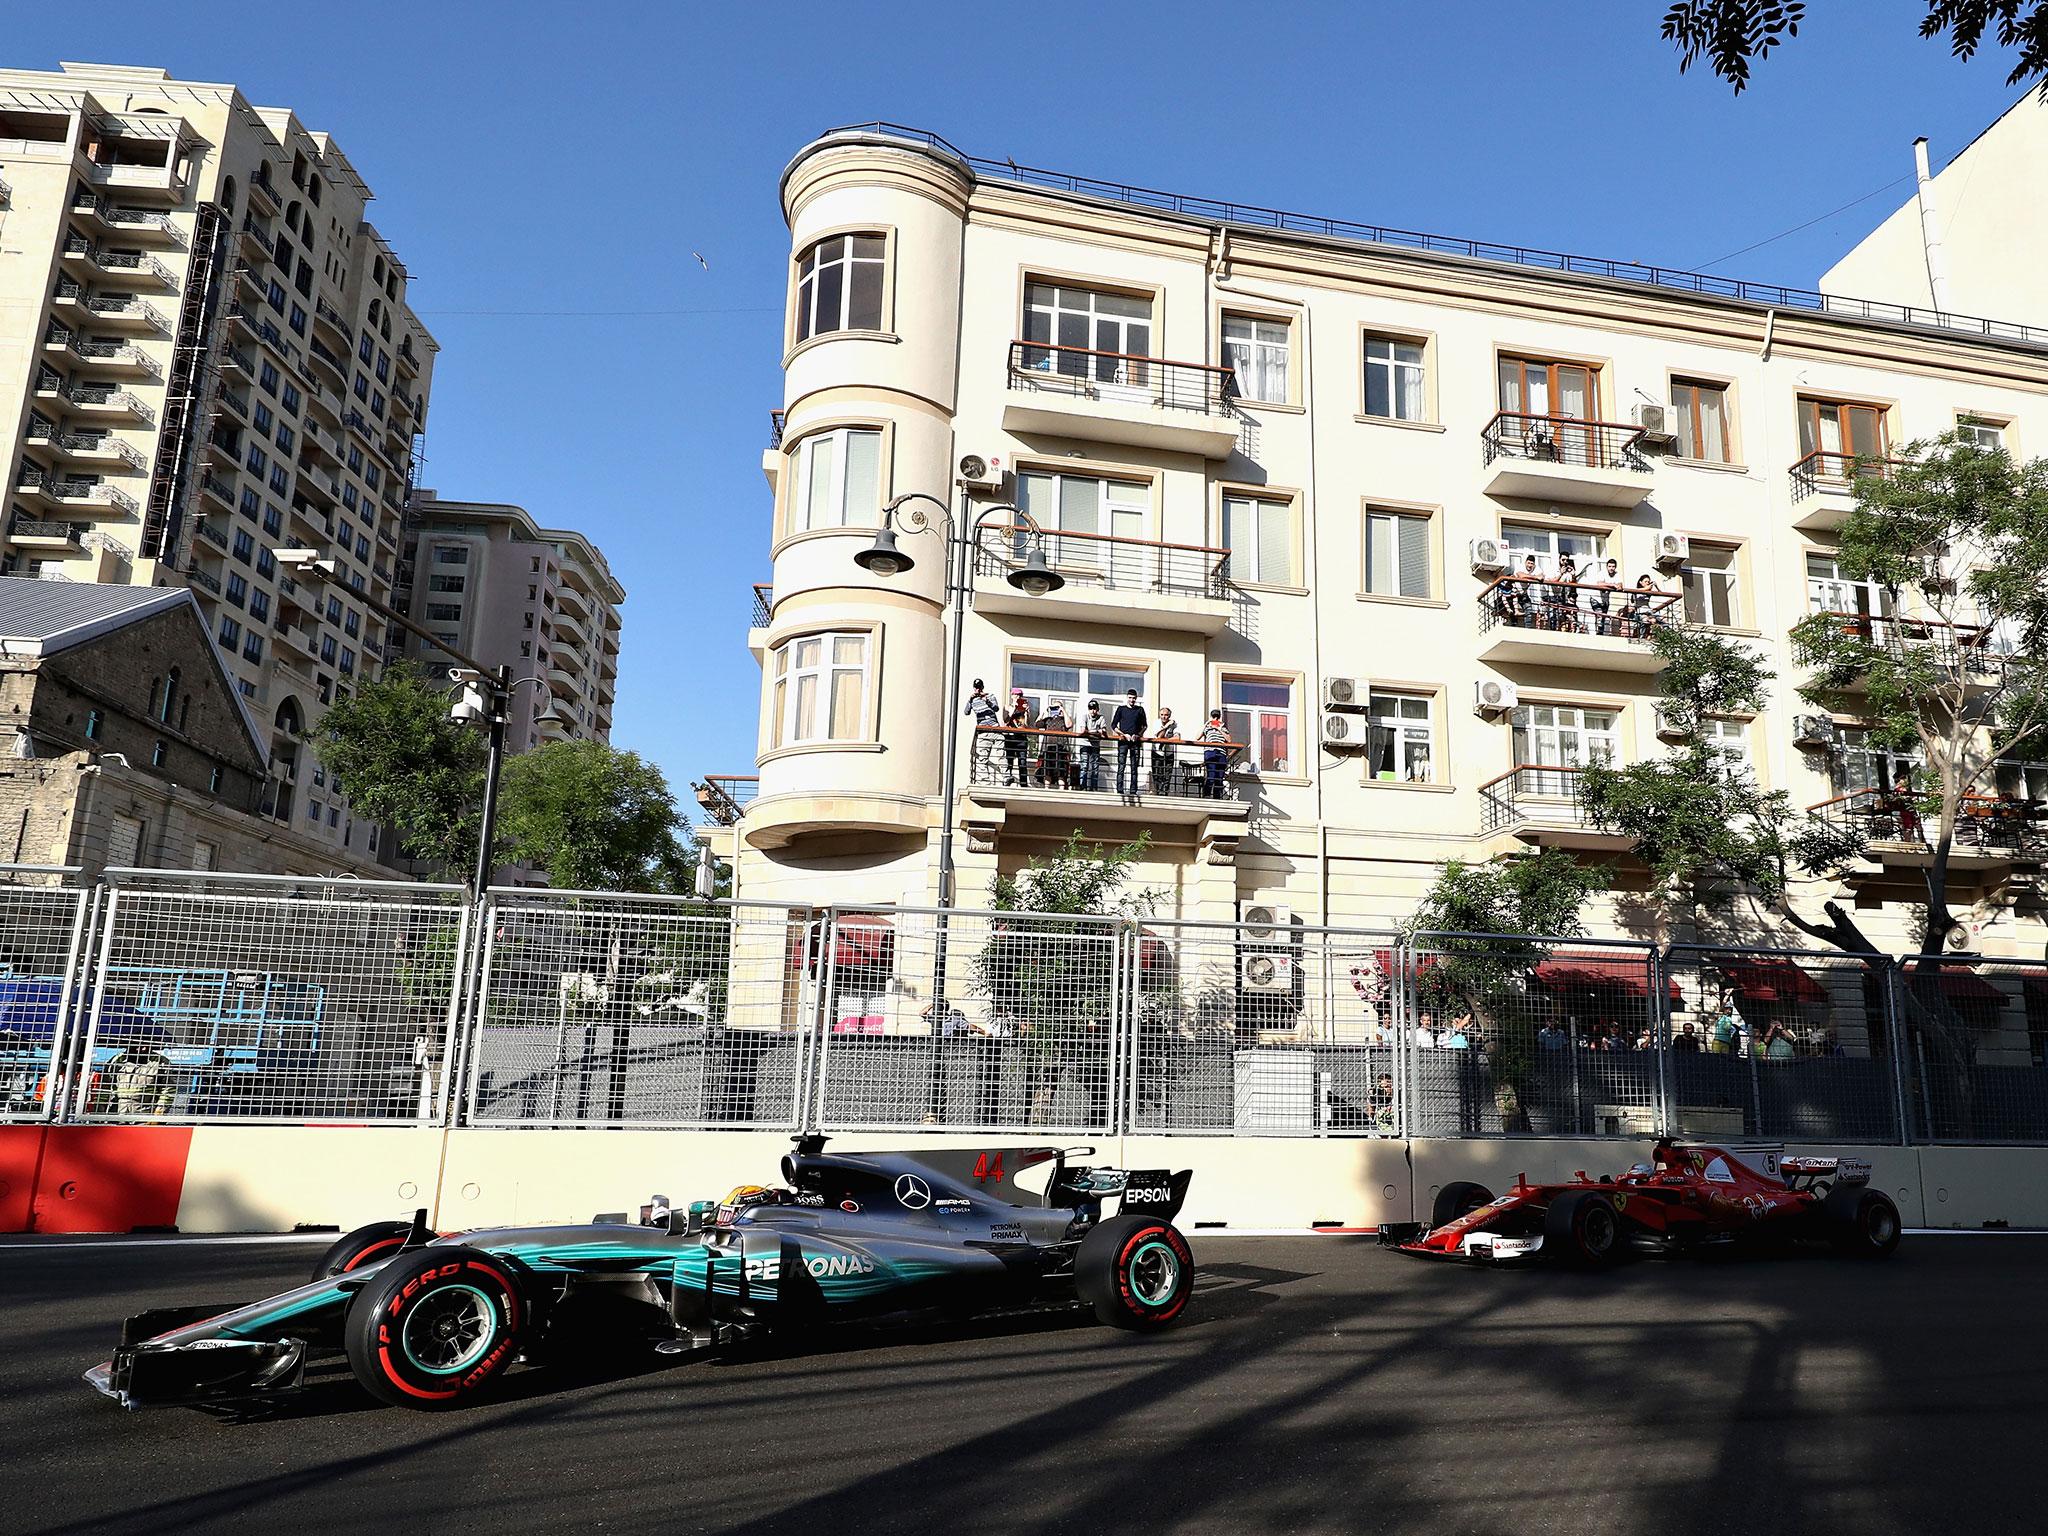 Hamilton and Vettel had a ding dong battle in Baku